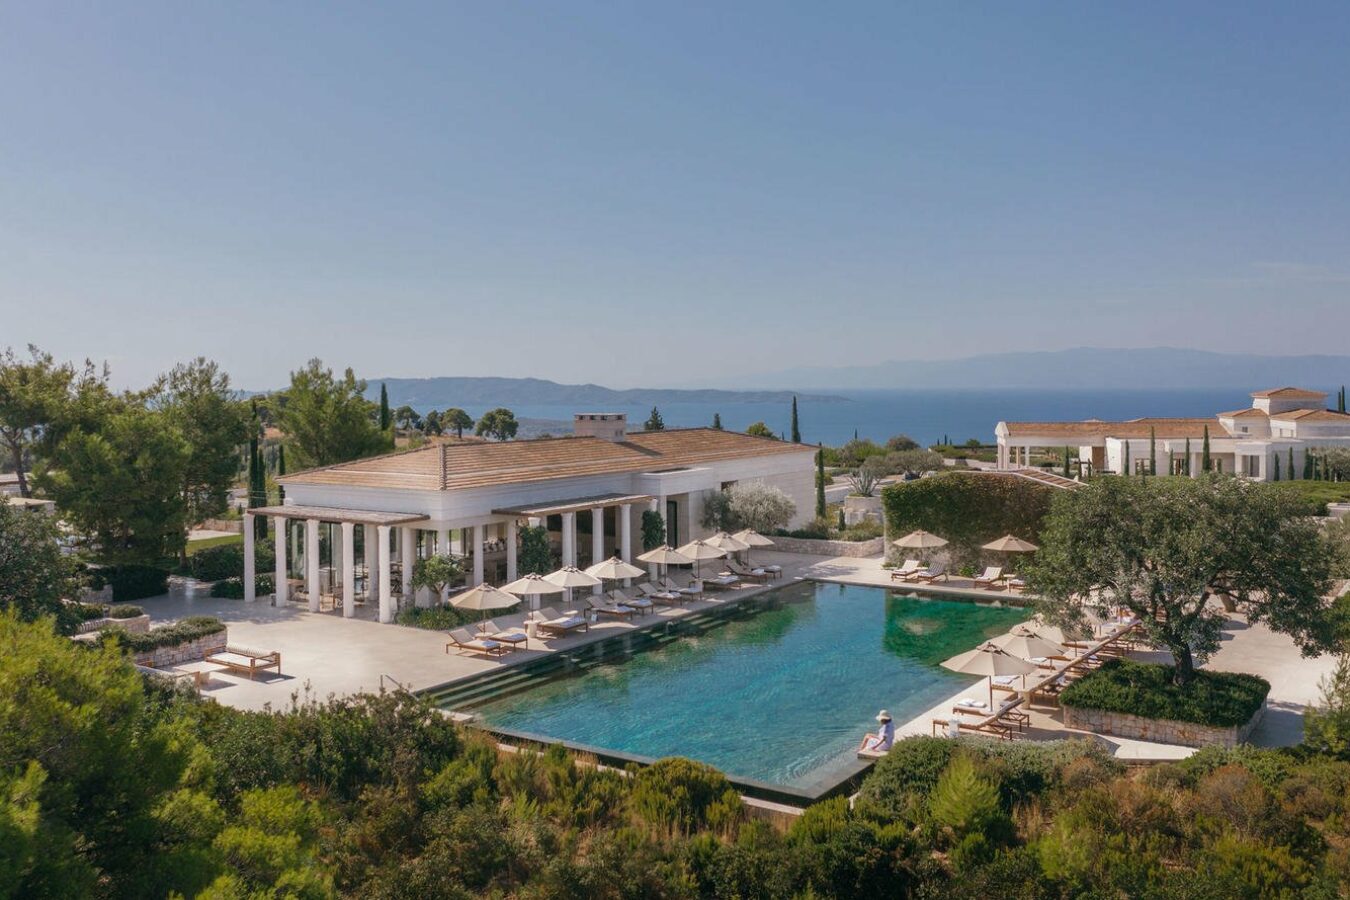 Review - We Check in to Amanzoe, Greece